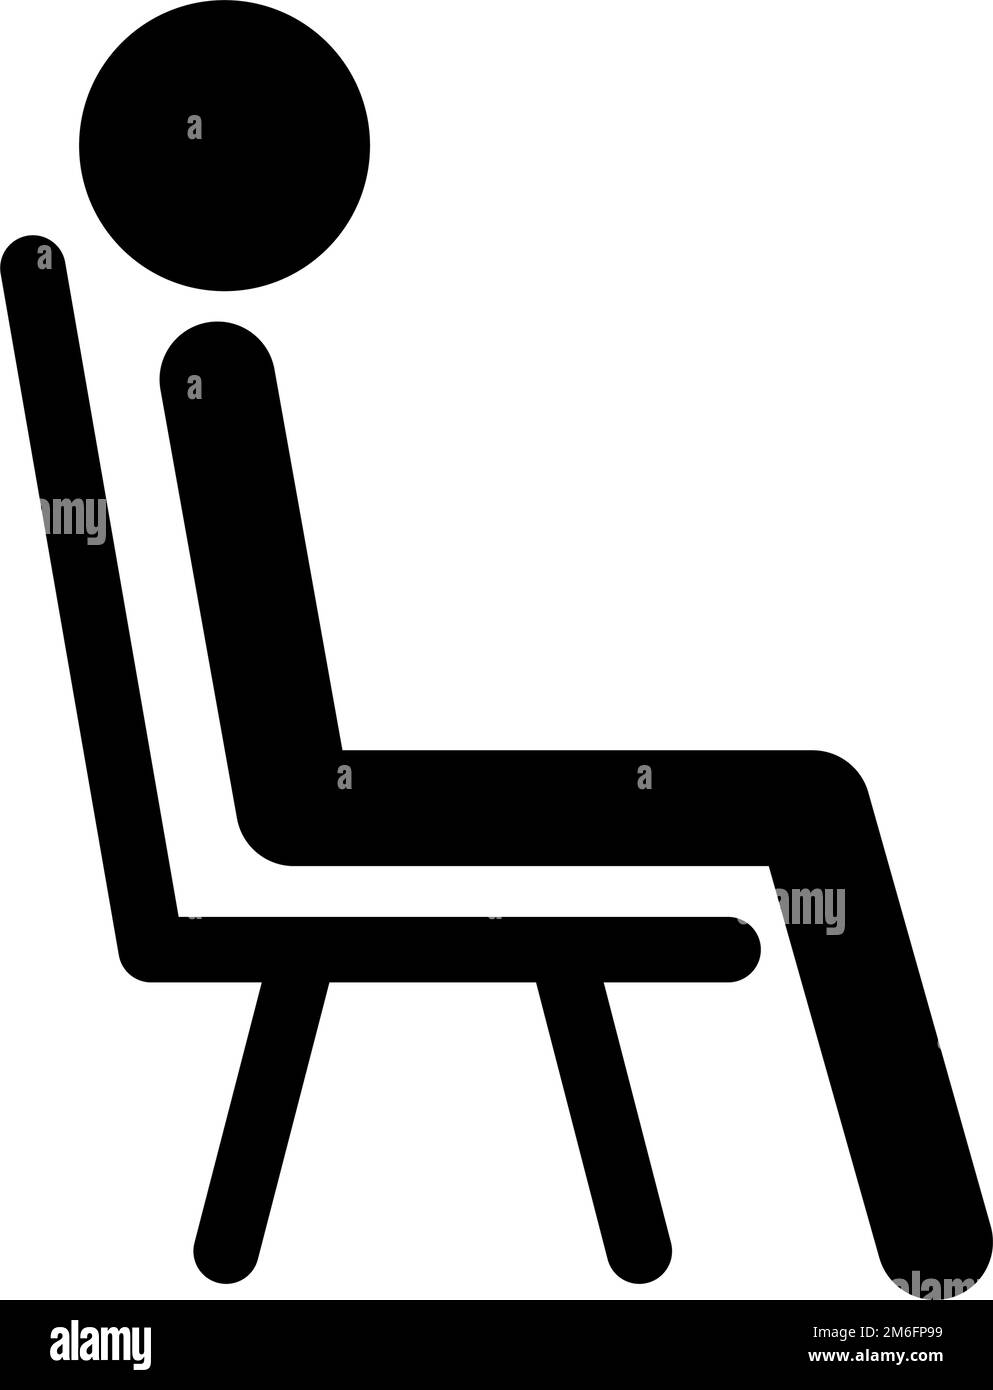 Person silhouette icon sitting on a chair. Editable vector. Stock Vector